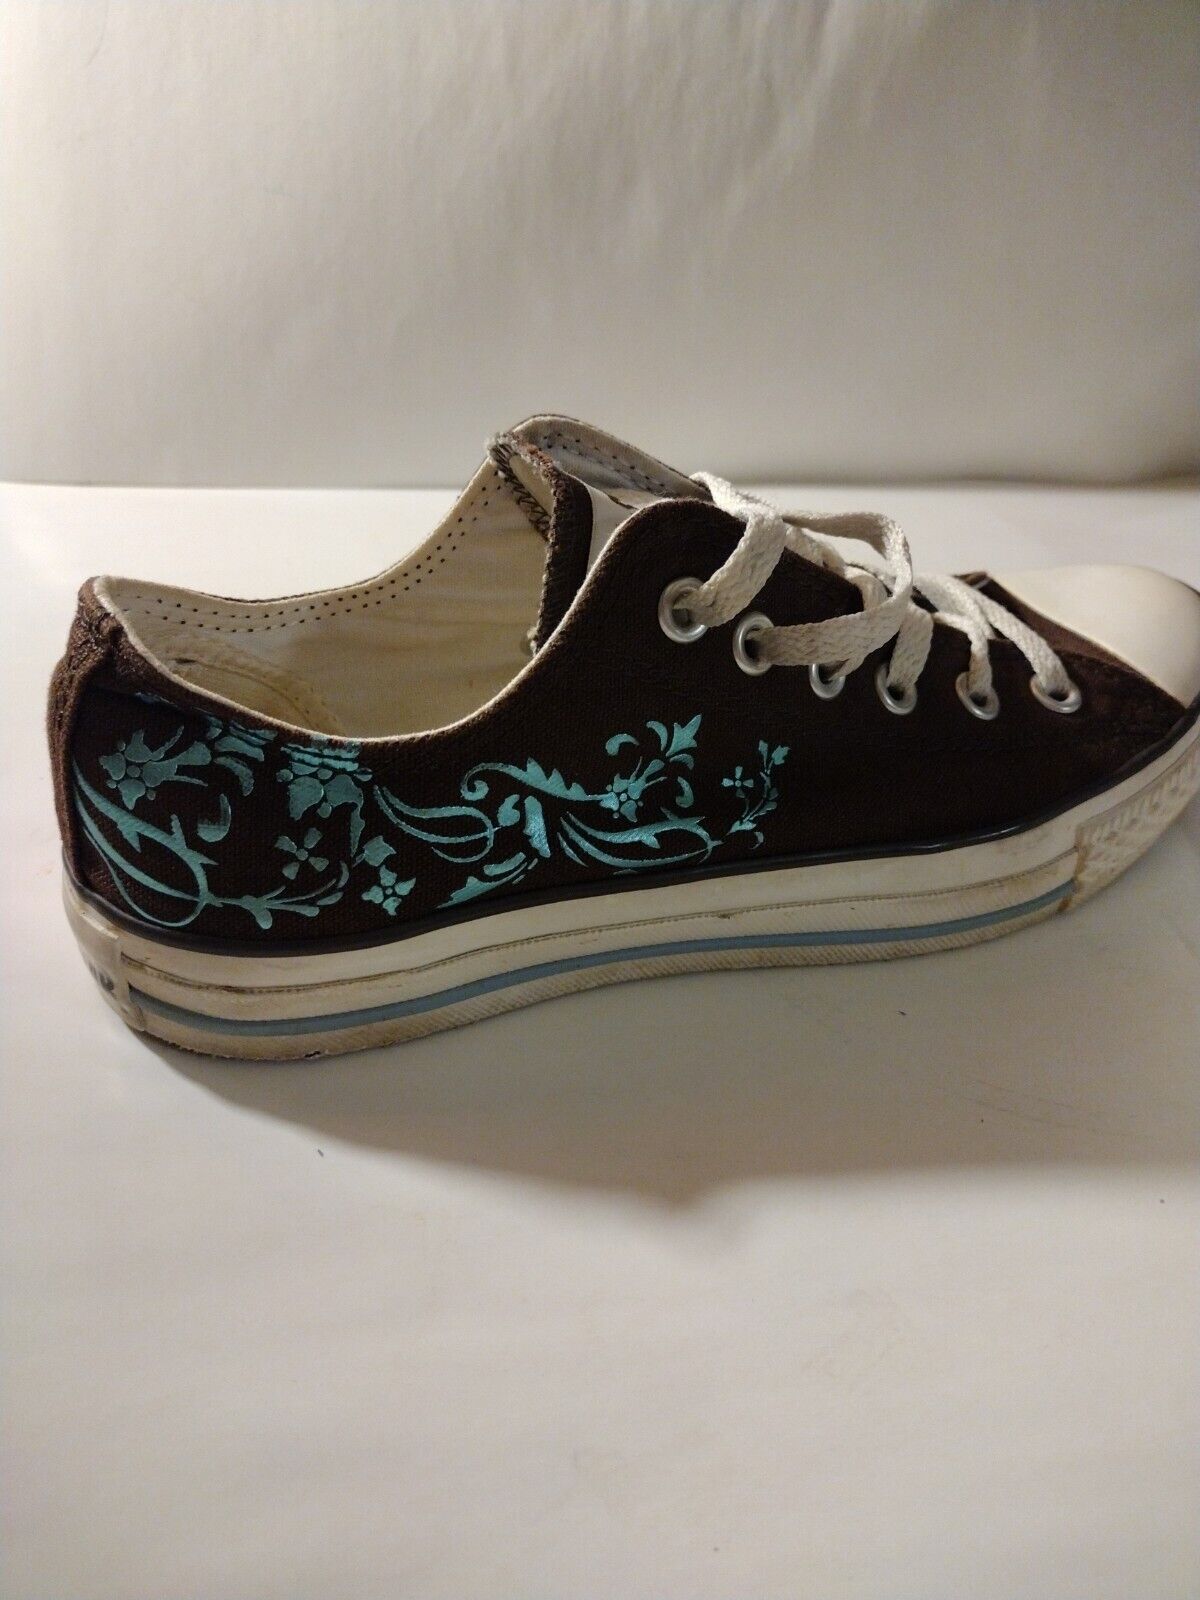 Converse Women's chocolate Brown with metallic blue design low top all star  | eBay